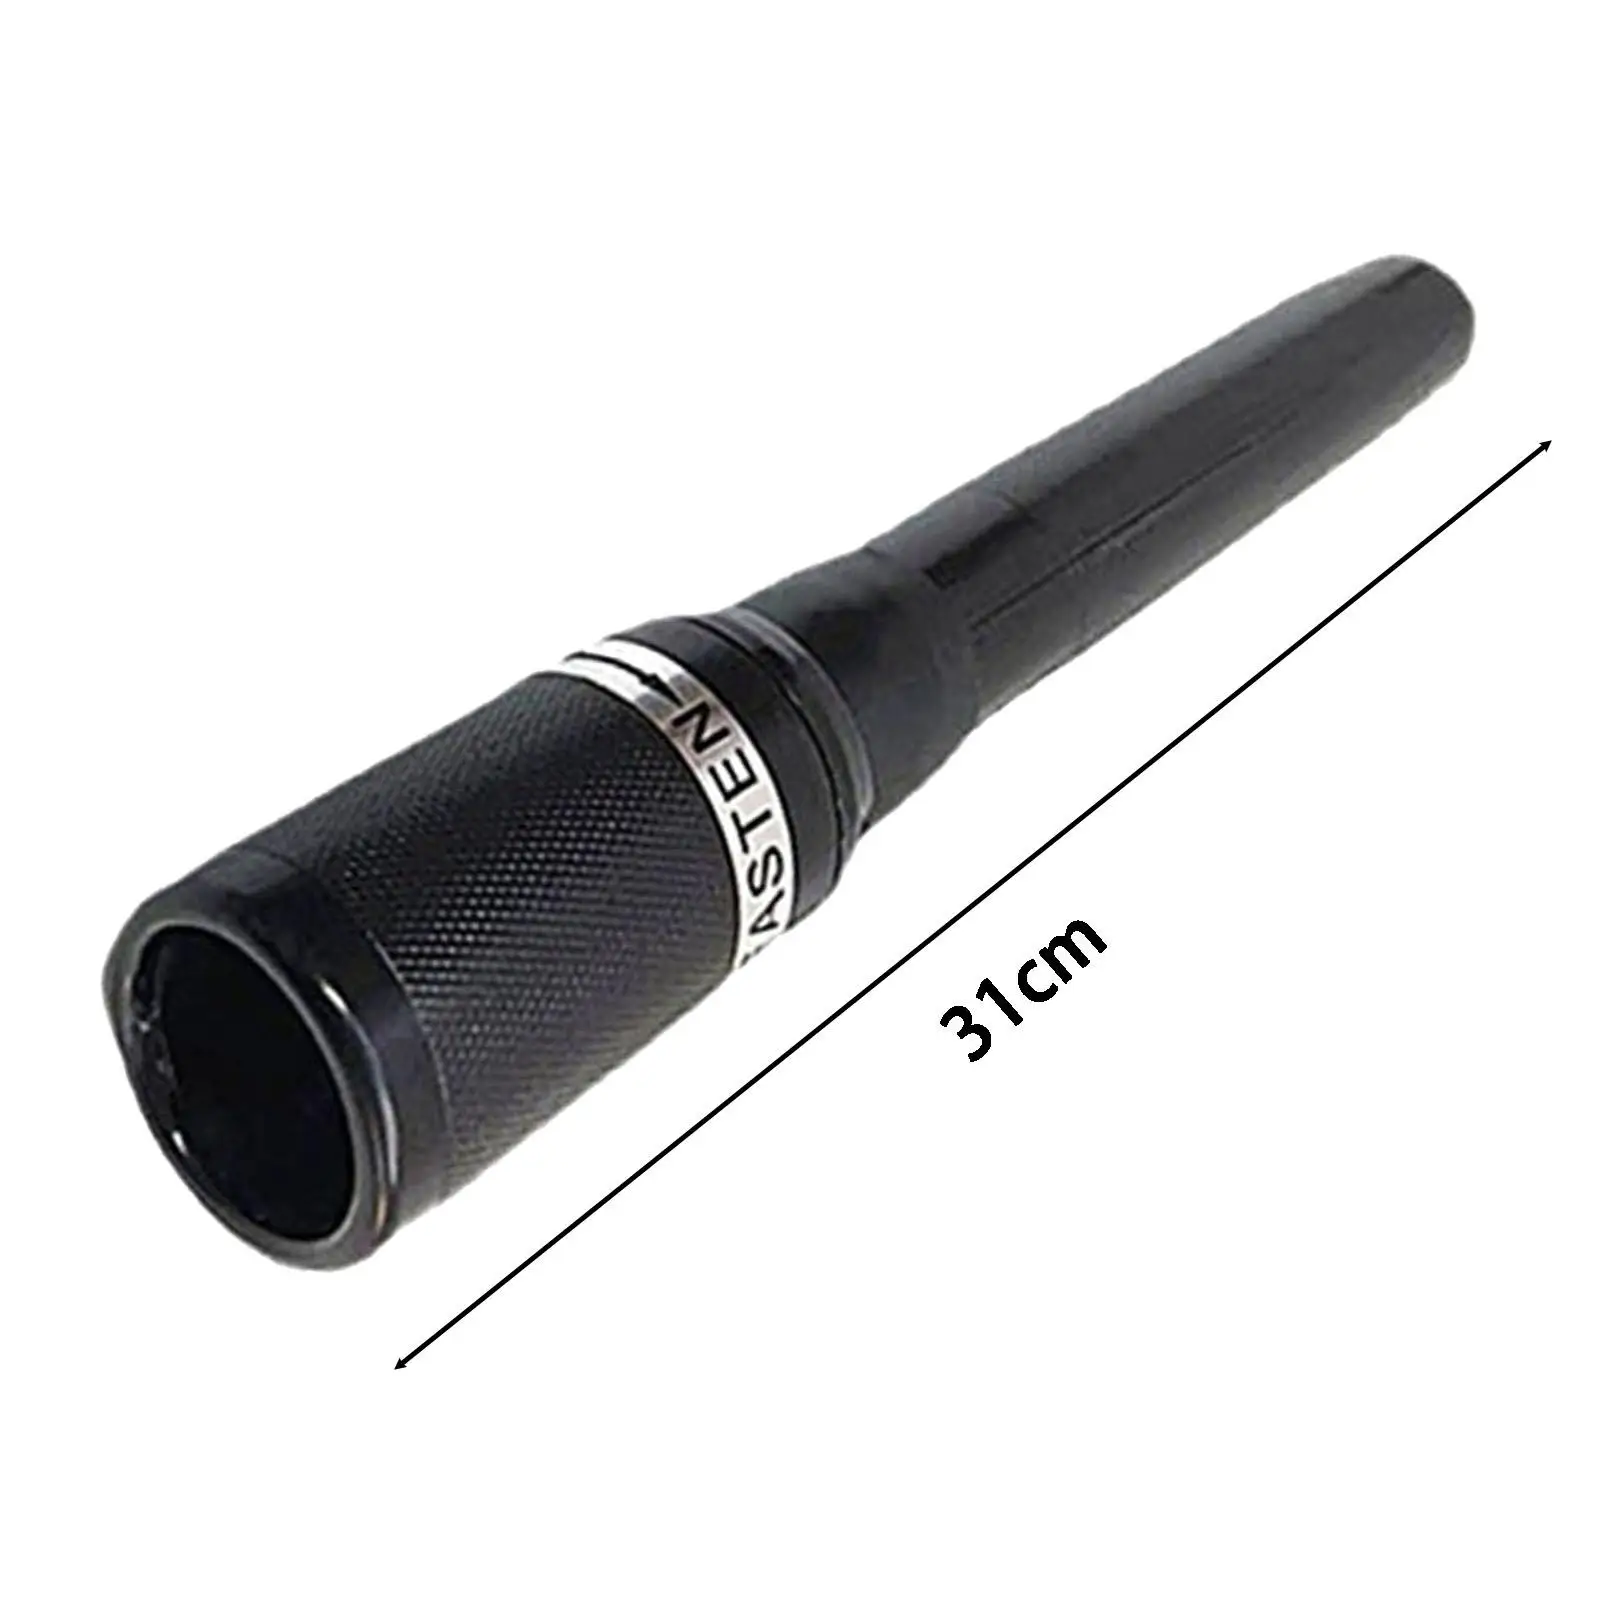 Billiard Pool Stick Extension American Cues Shaft Sleeve Accessory End Lengthener Replacement Billiard Holder Pool Cue Extension